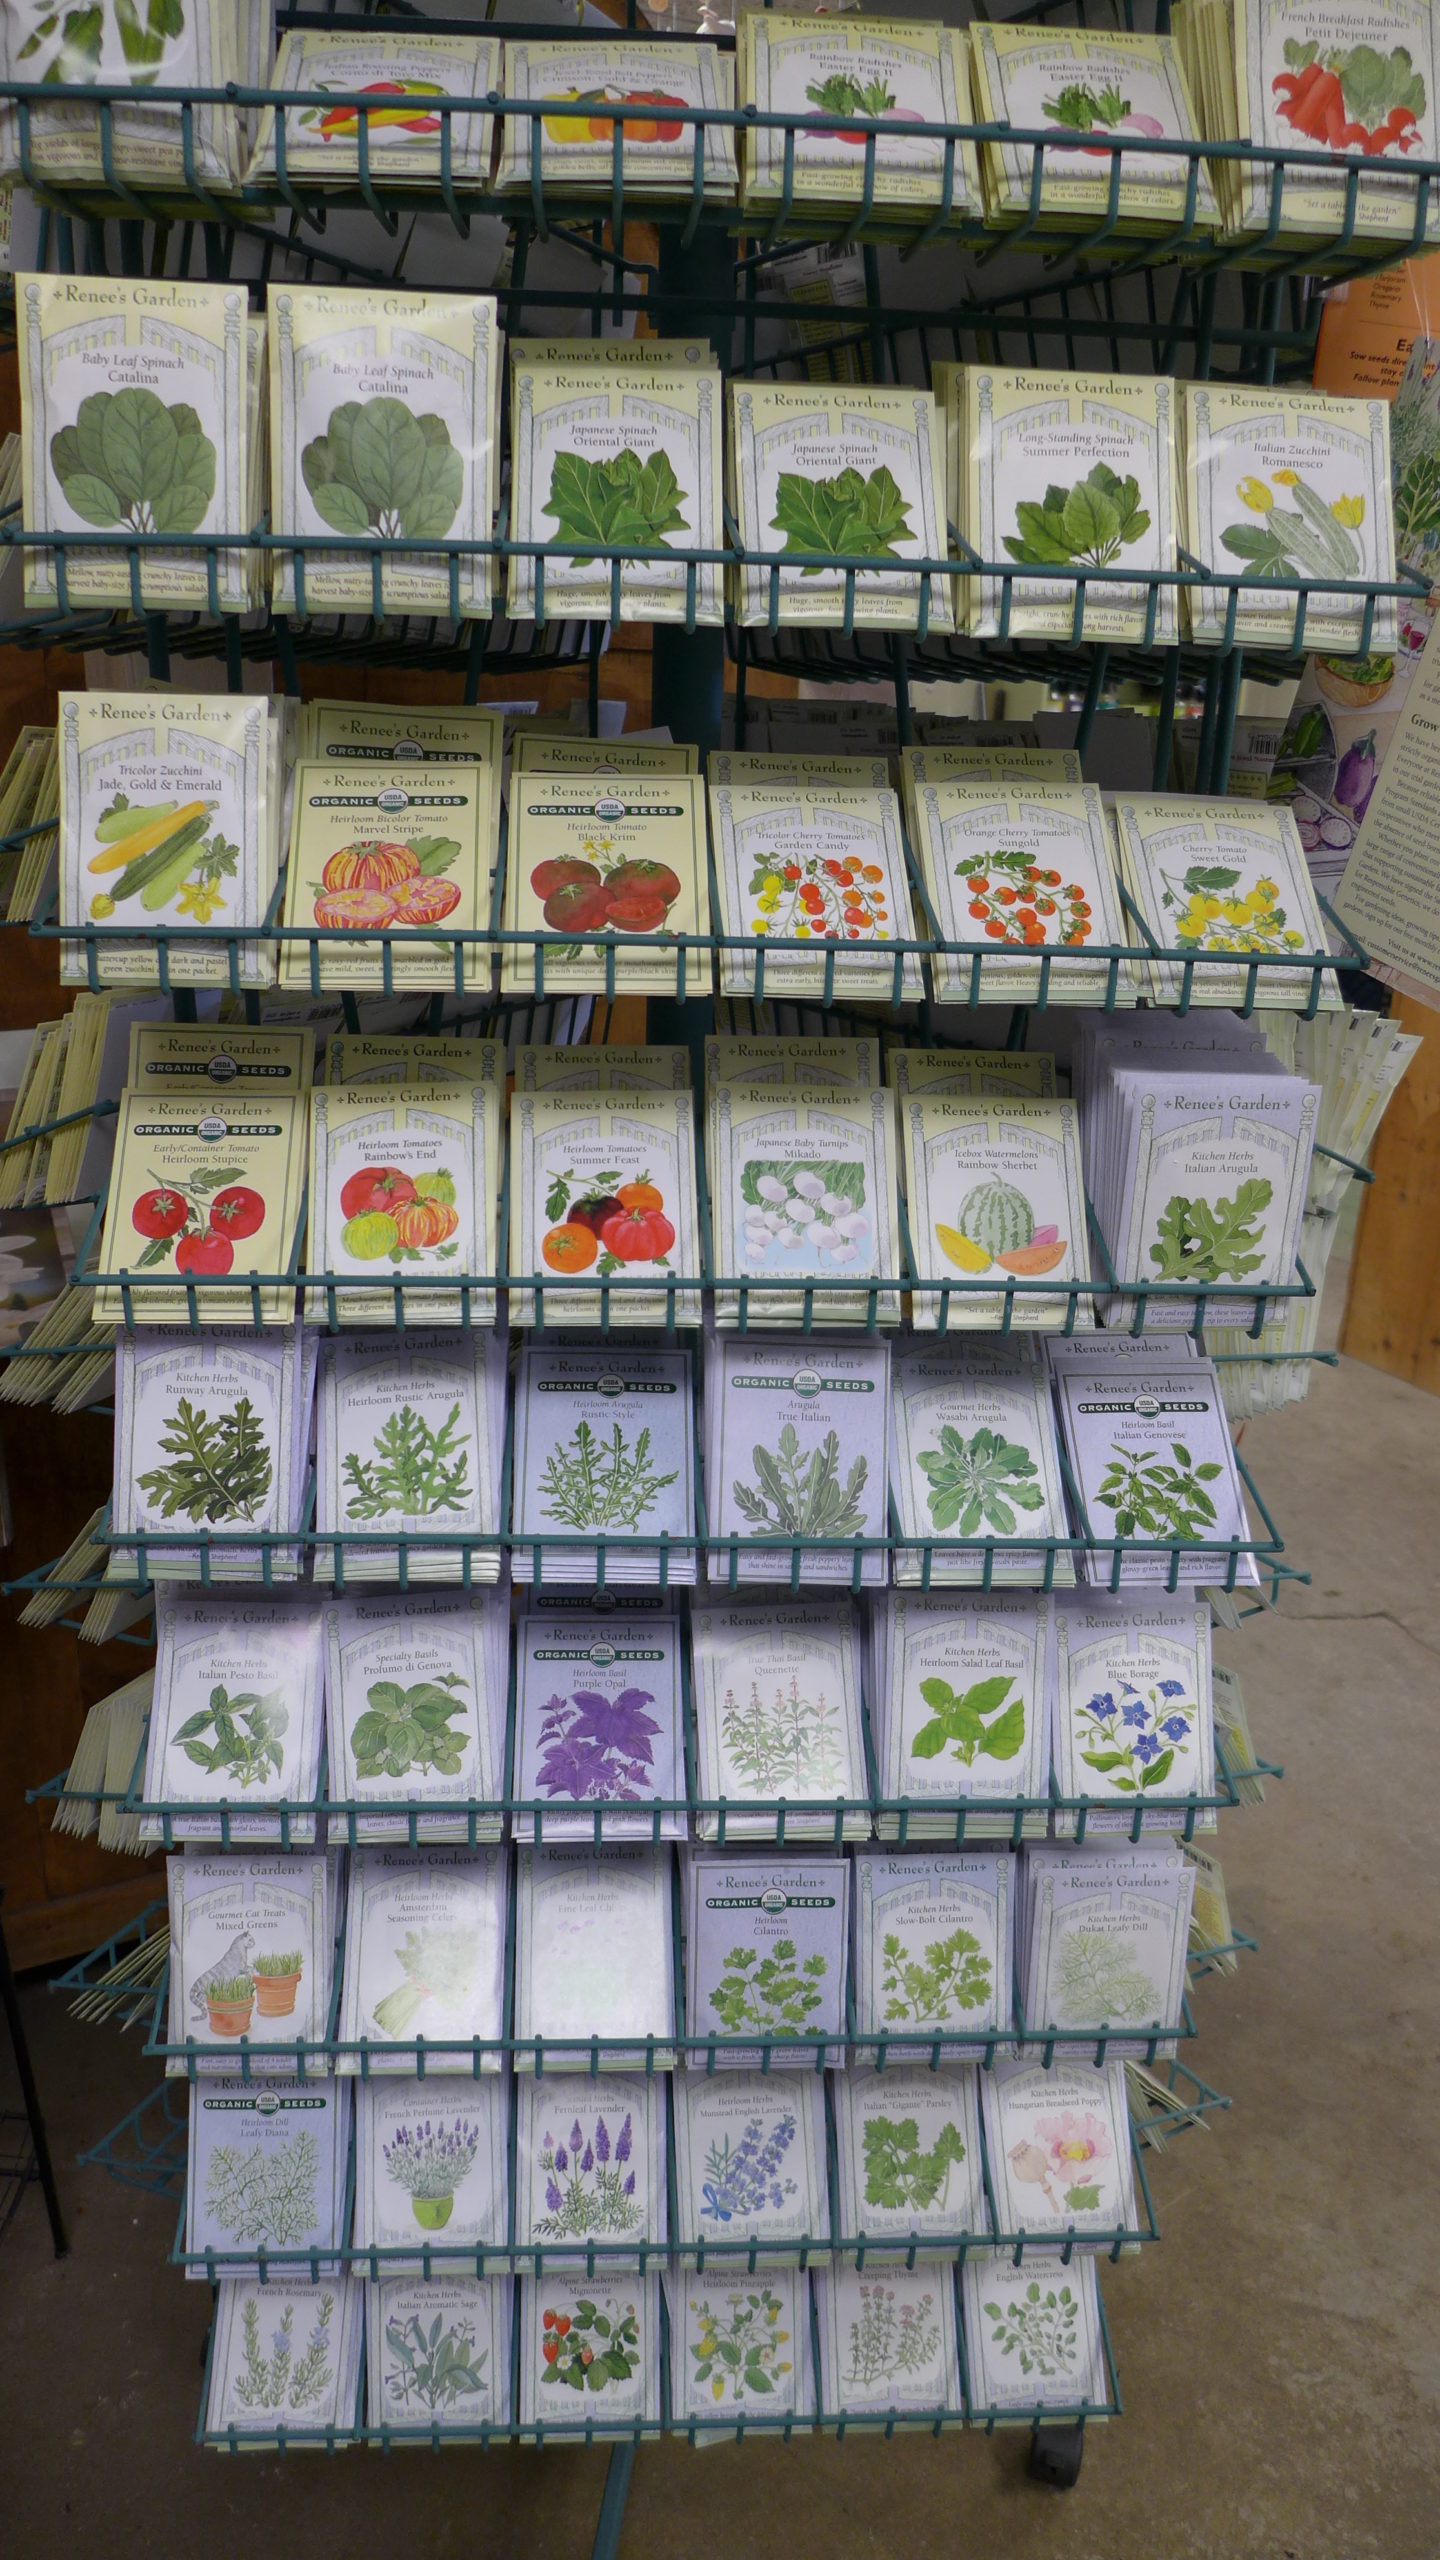 Most garden centers will have their seed racks out in early March. Shop brand names like Burpee, Johnny’s, Renee’s and others. If you’re not familiar with the brand, as you may find on some discount outlets, maybe pass them up?